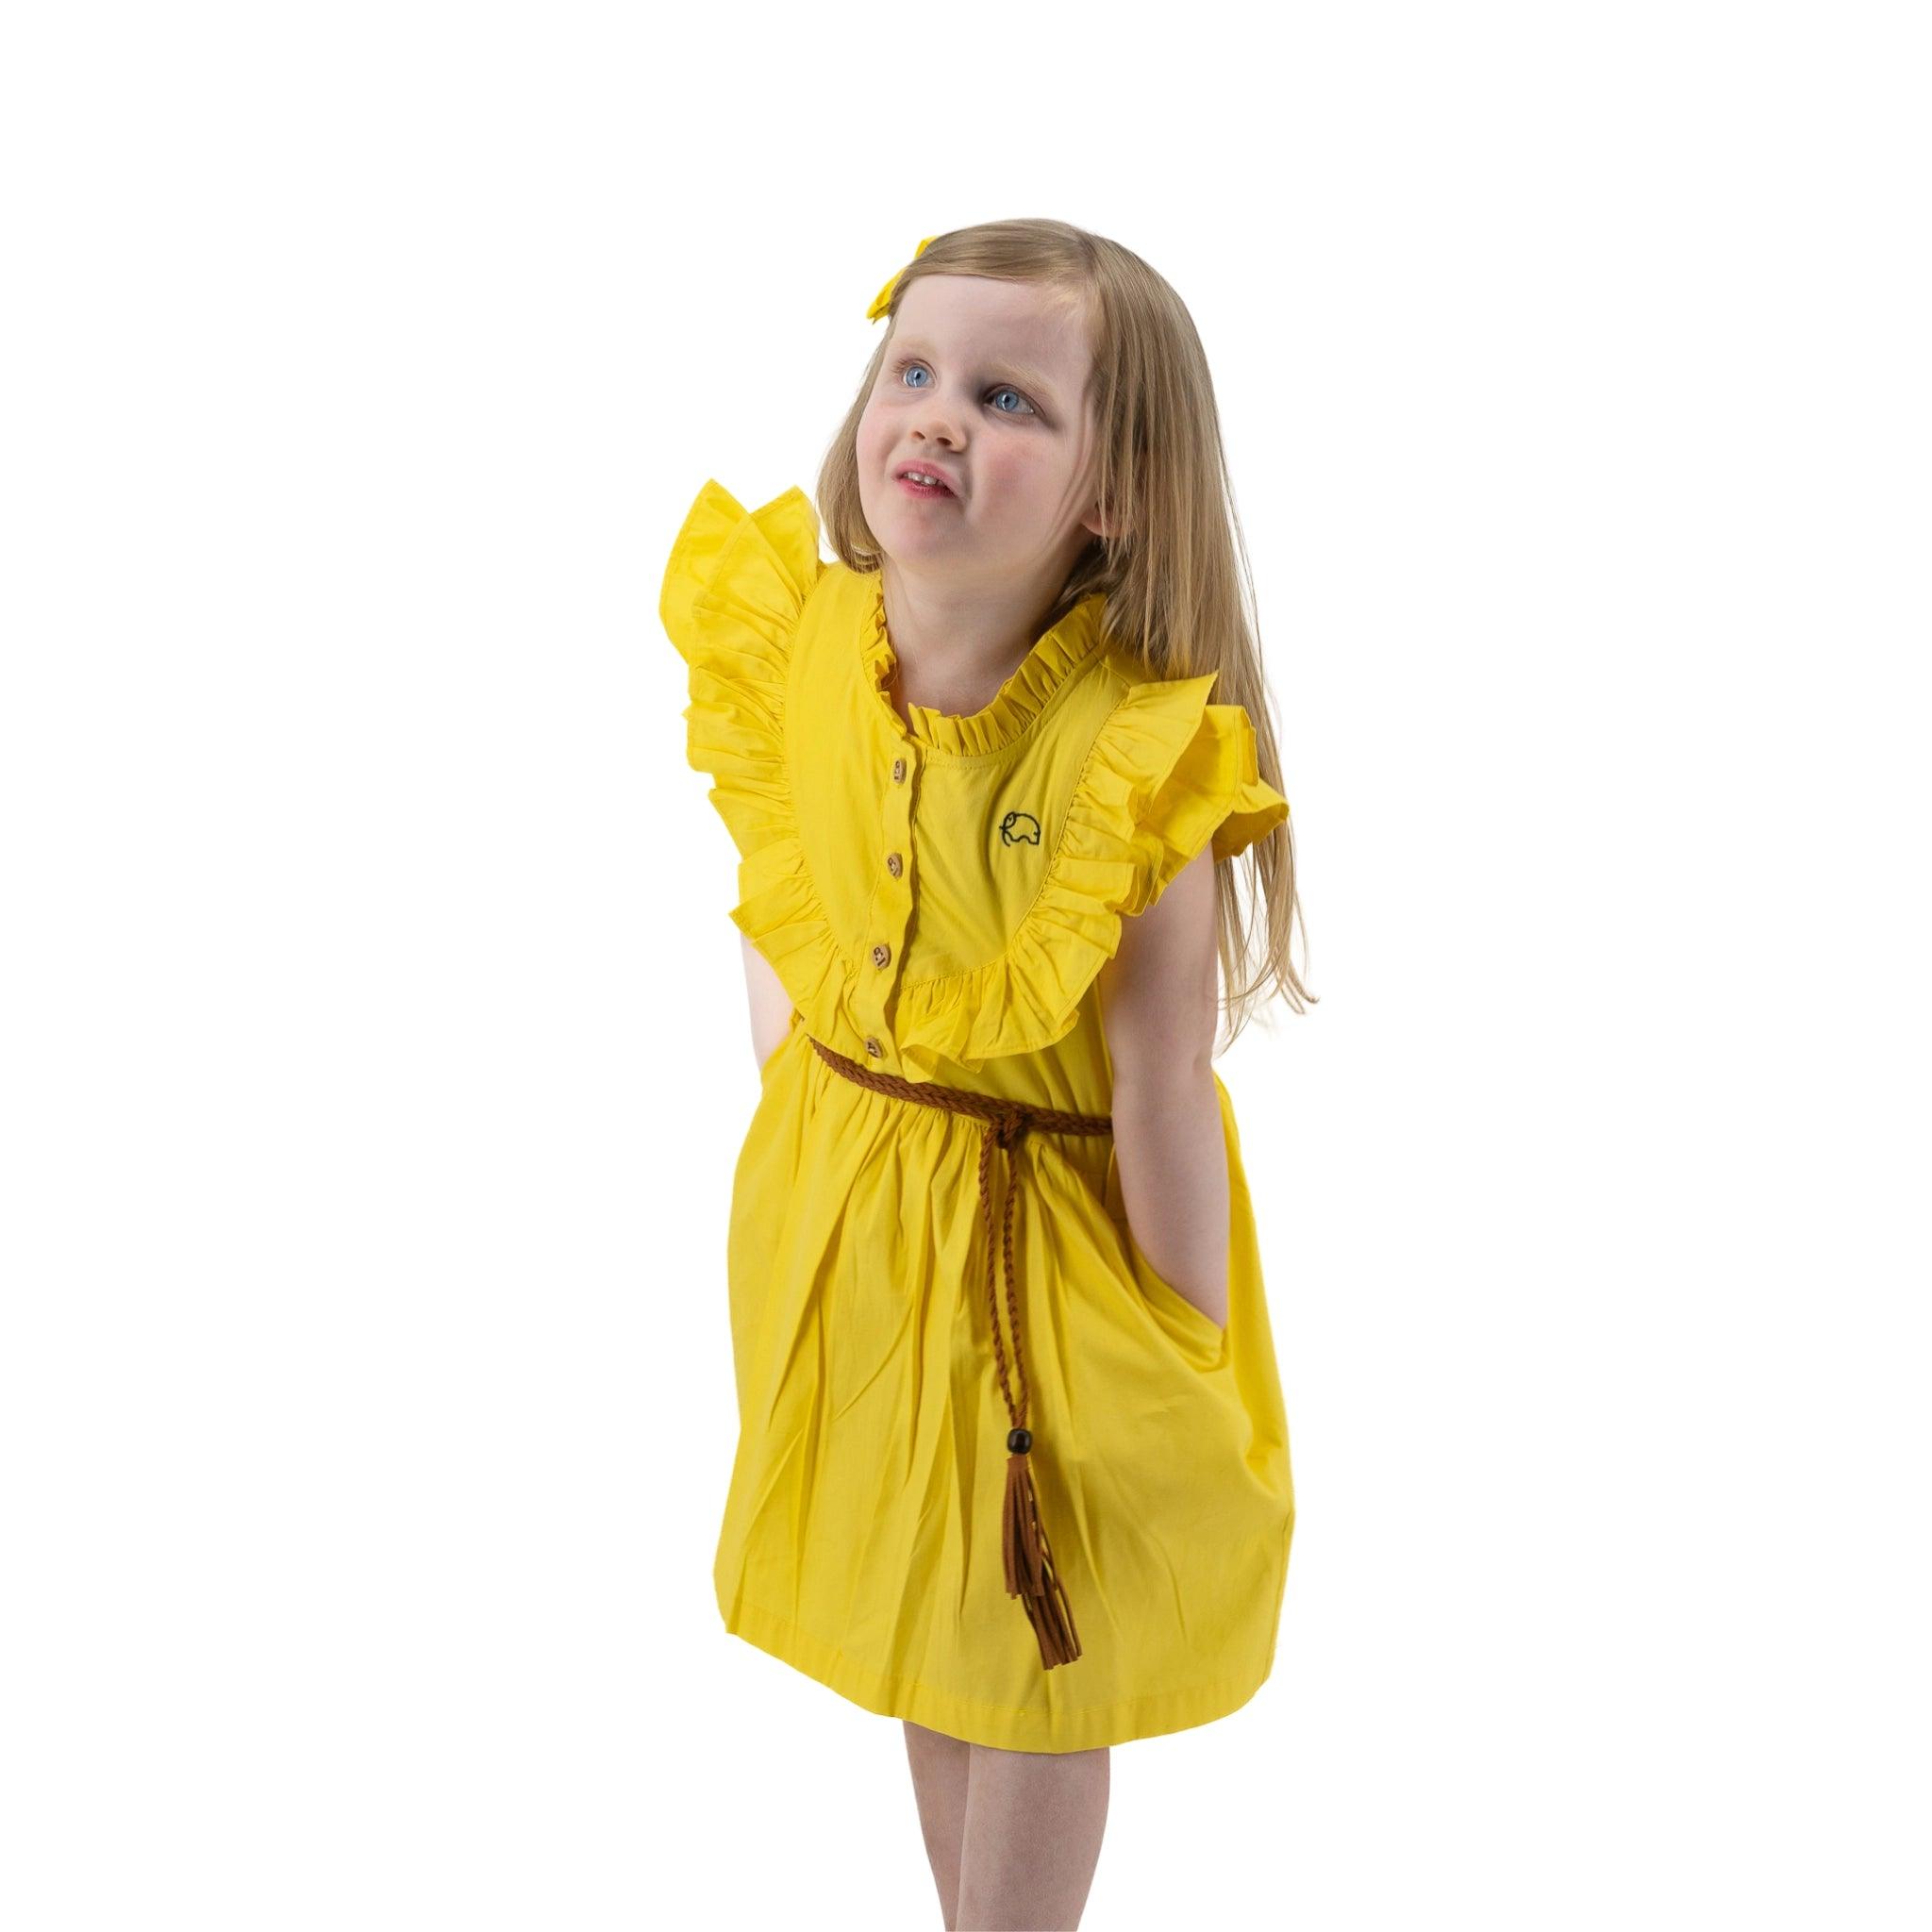 Young girl in a Karee yellow butterfly sleeve cotton dress looking up thoughtfully, standing isolated on a white background.